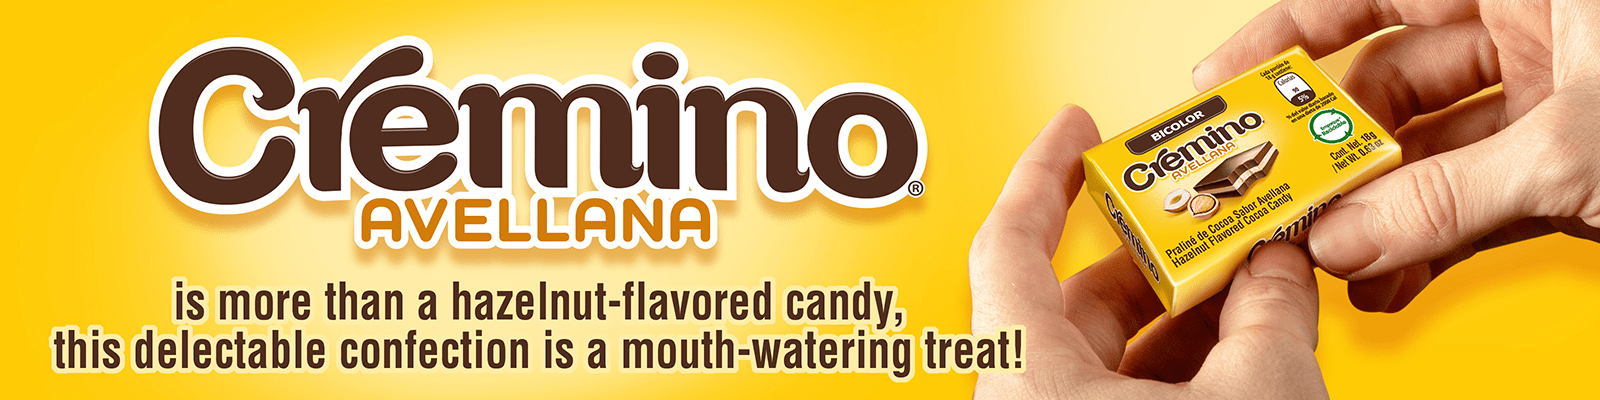 Banner Cremino- AVELLANA IS MORE THAN A HAZELNUT-FLAVORED CANDY, THIS DELECTABLE CONFECTION IS A MOUTH-WATERING TREAT